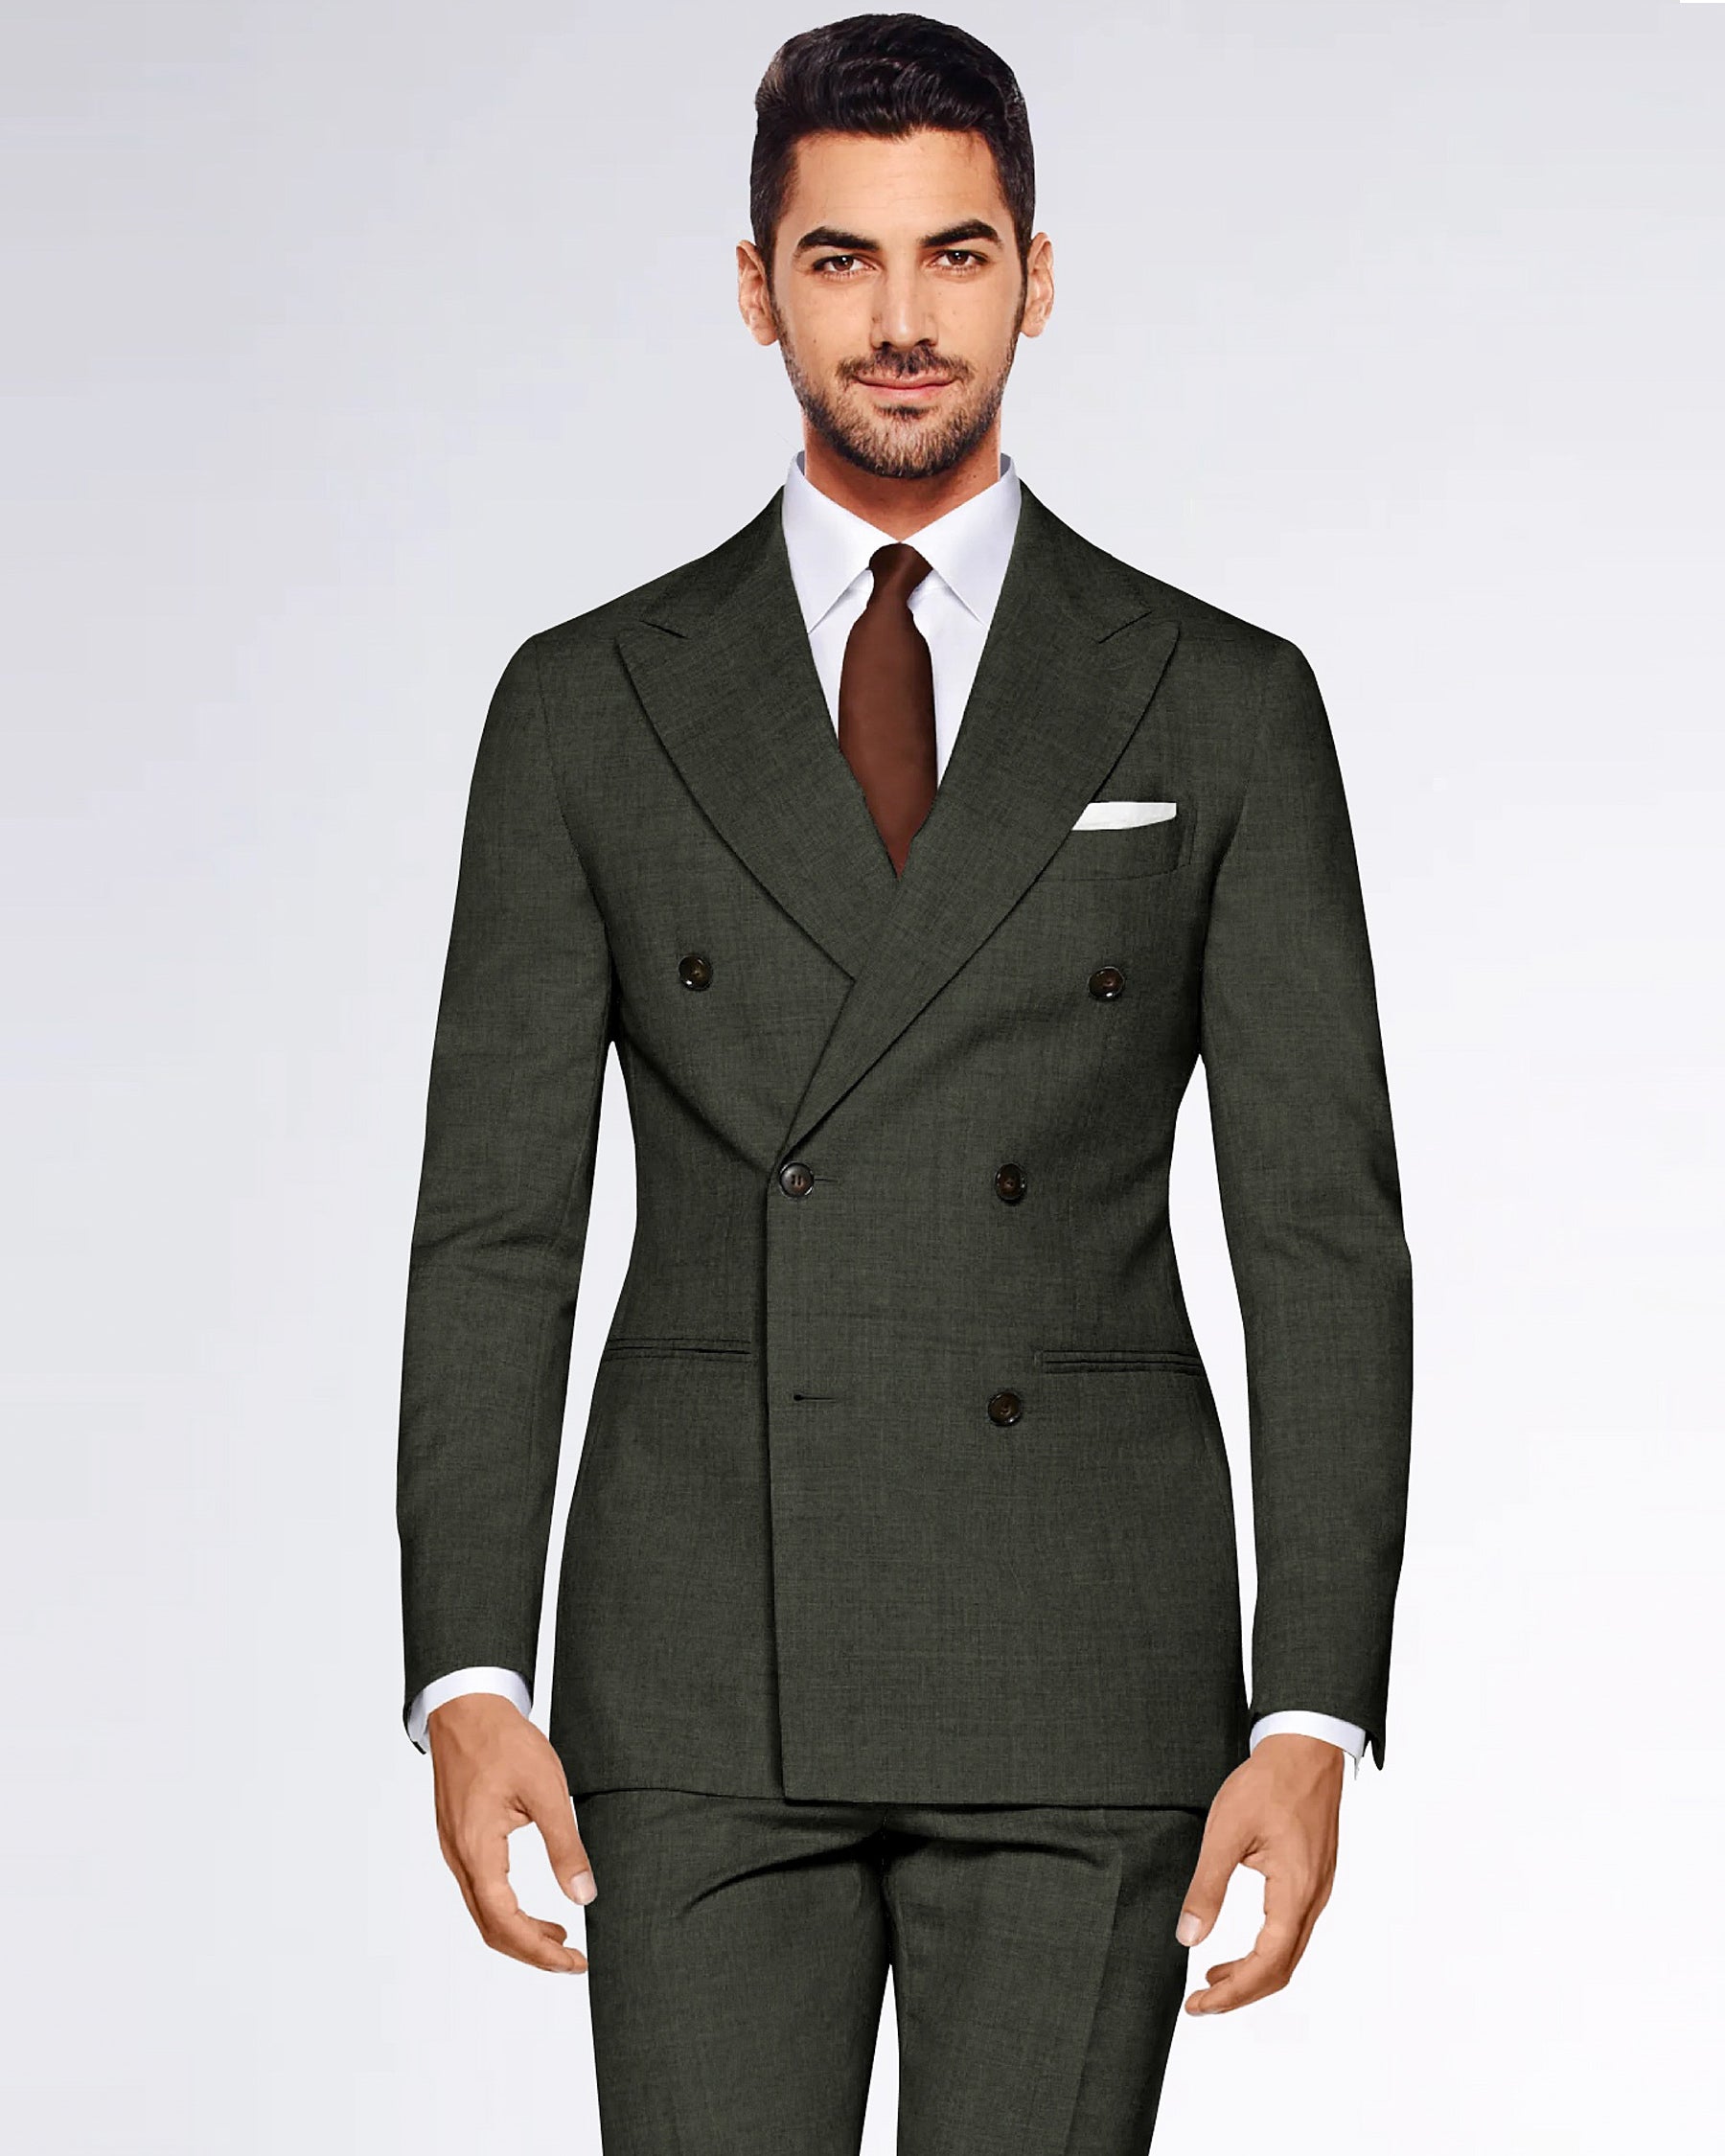 Juniper Green Subtle Sheen Double Breasted Suit ST51DB-R-36, ST51DB-R-38, ST51DB-R-40, ST51DB-R-42, ST51DB-R-44, ST51DB-R-46, ST51DB-R-48, ST51DB-R-50, ST51DB-R-52, ST51DB-R-54, ST51DB-R-56, ST51DB-R-58, ST51DB-R-60